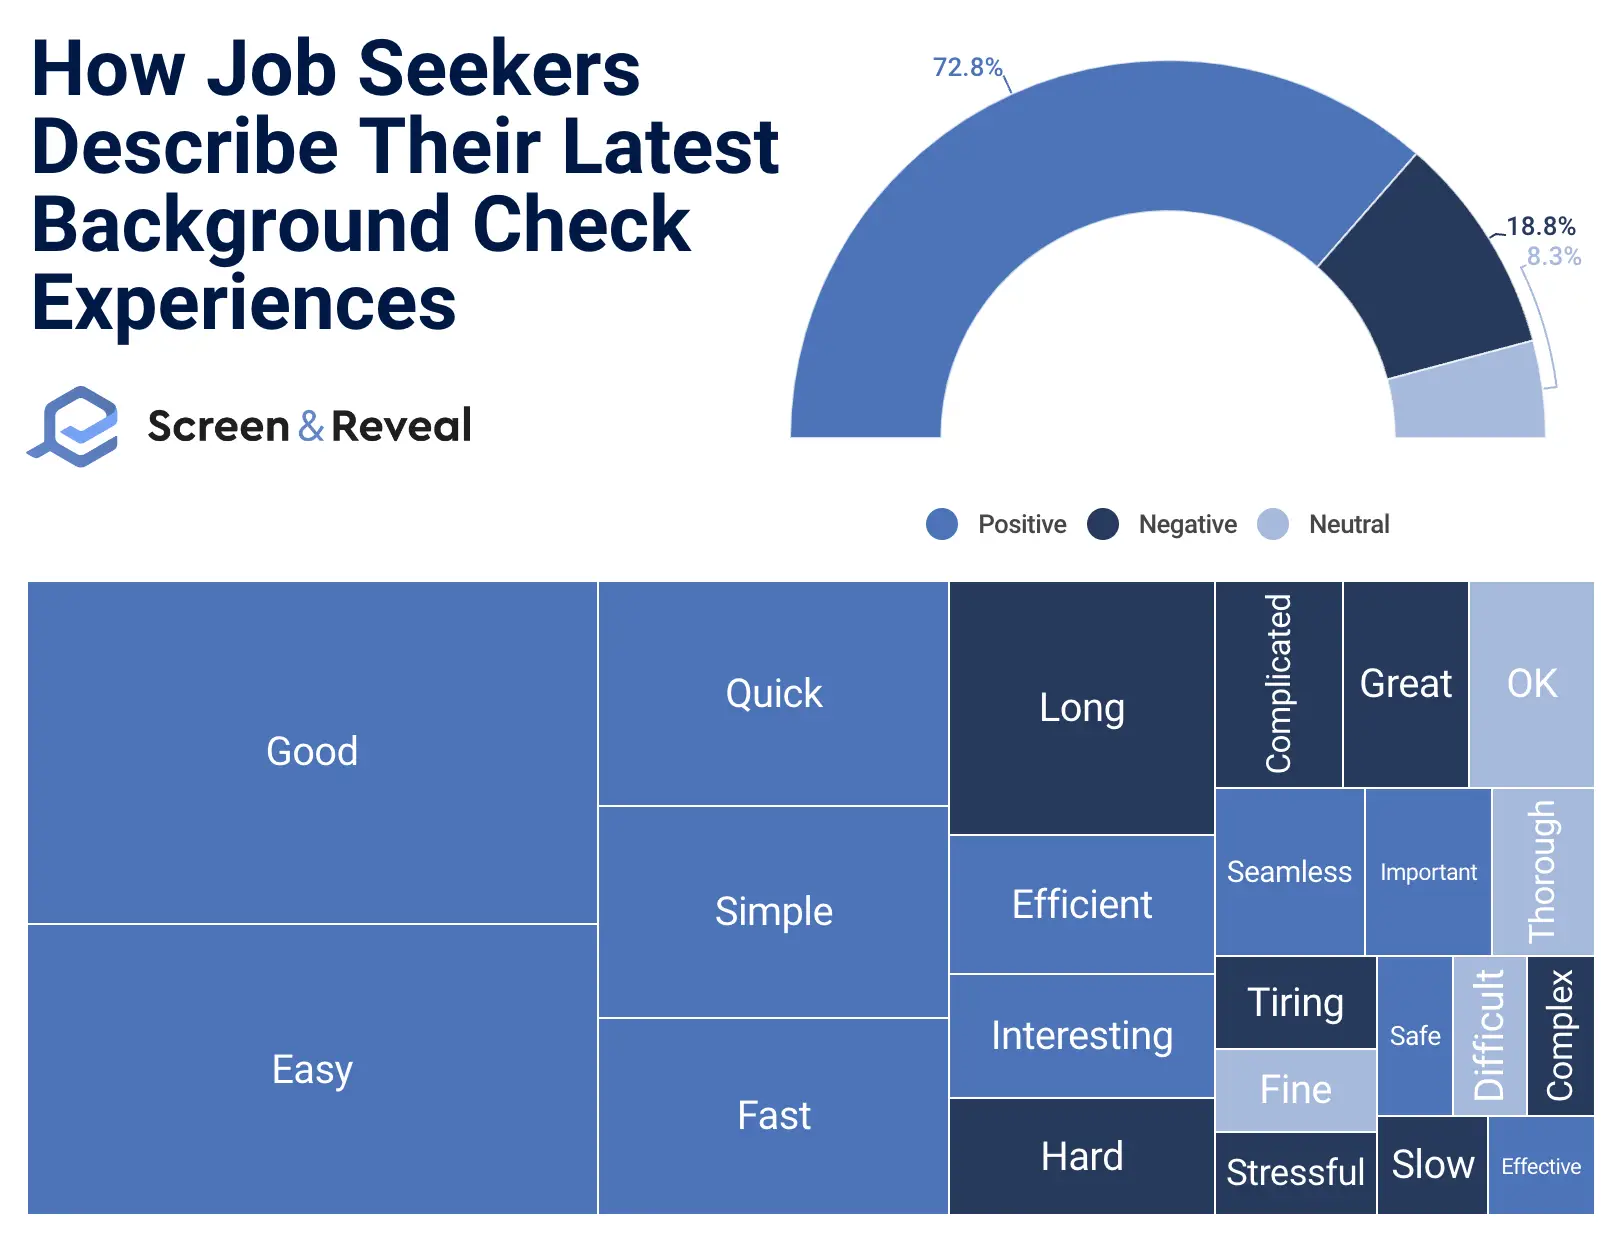 How Job Seekers Describe Their Latest Background Check Experiences (1)